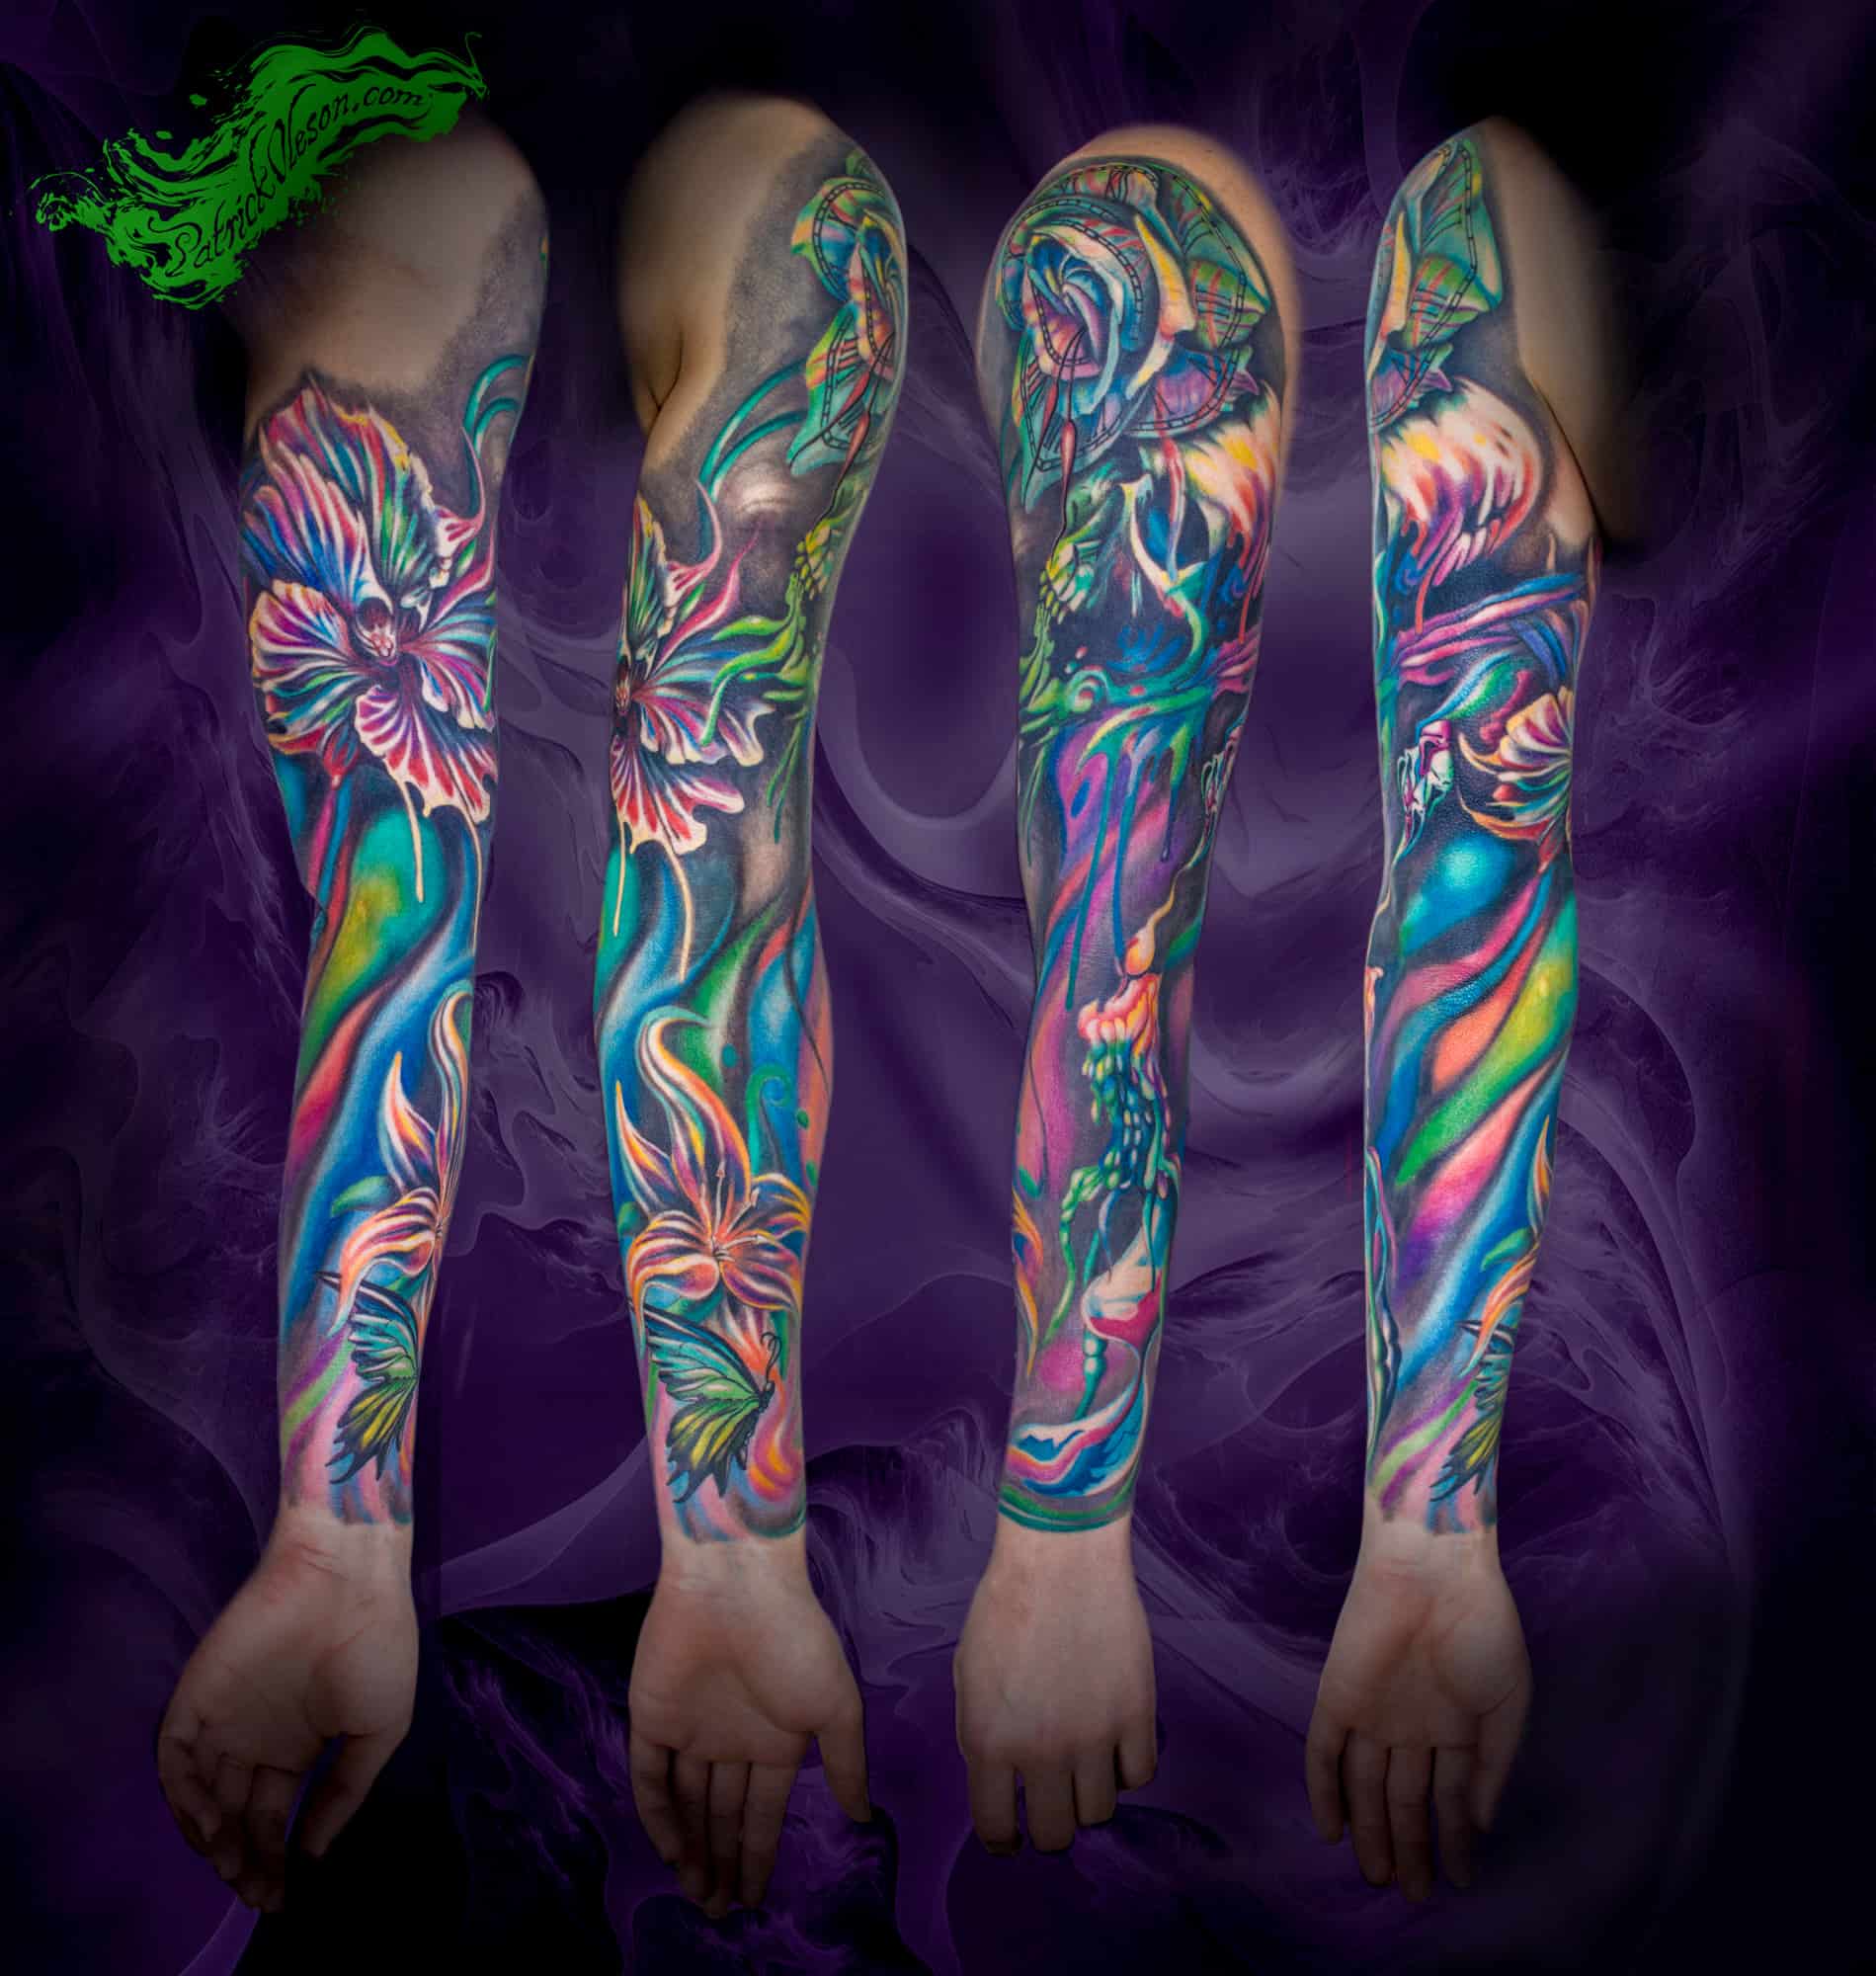 HD wallpaper Artistic Tattoo Psychedelic Trippy  Wallpaper Flare